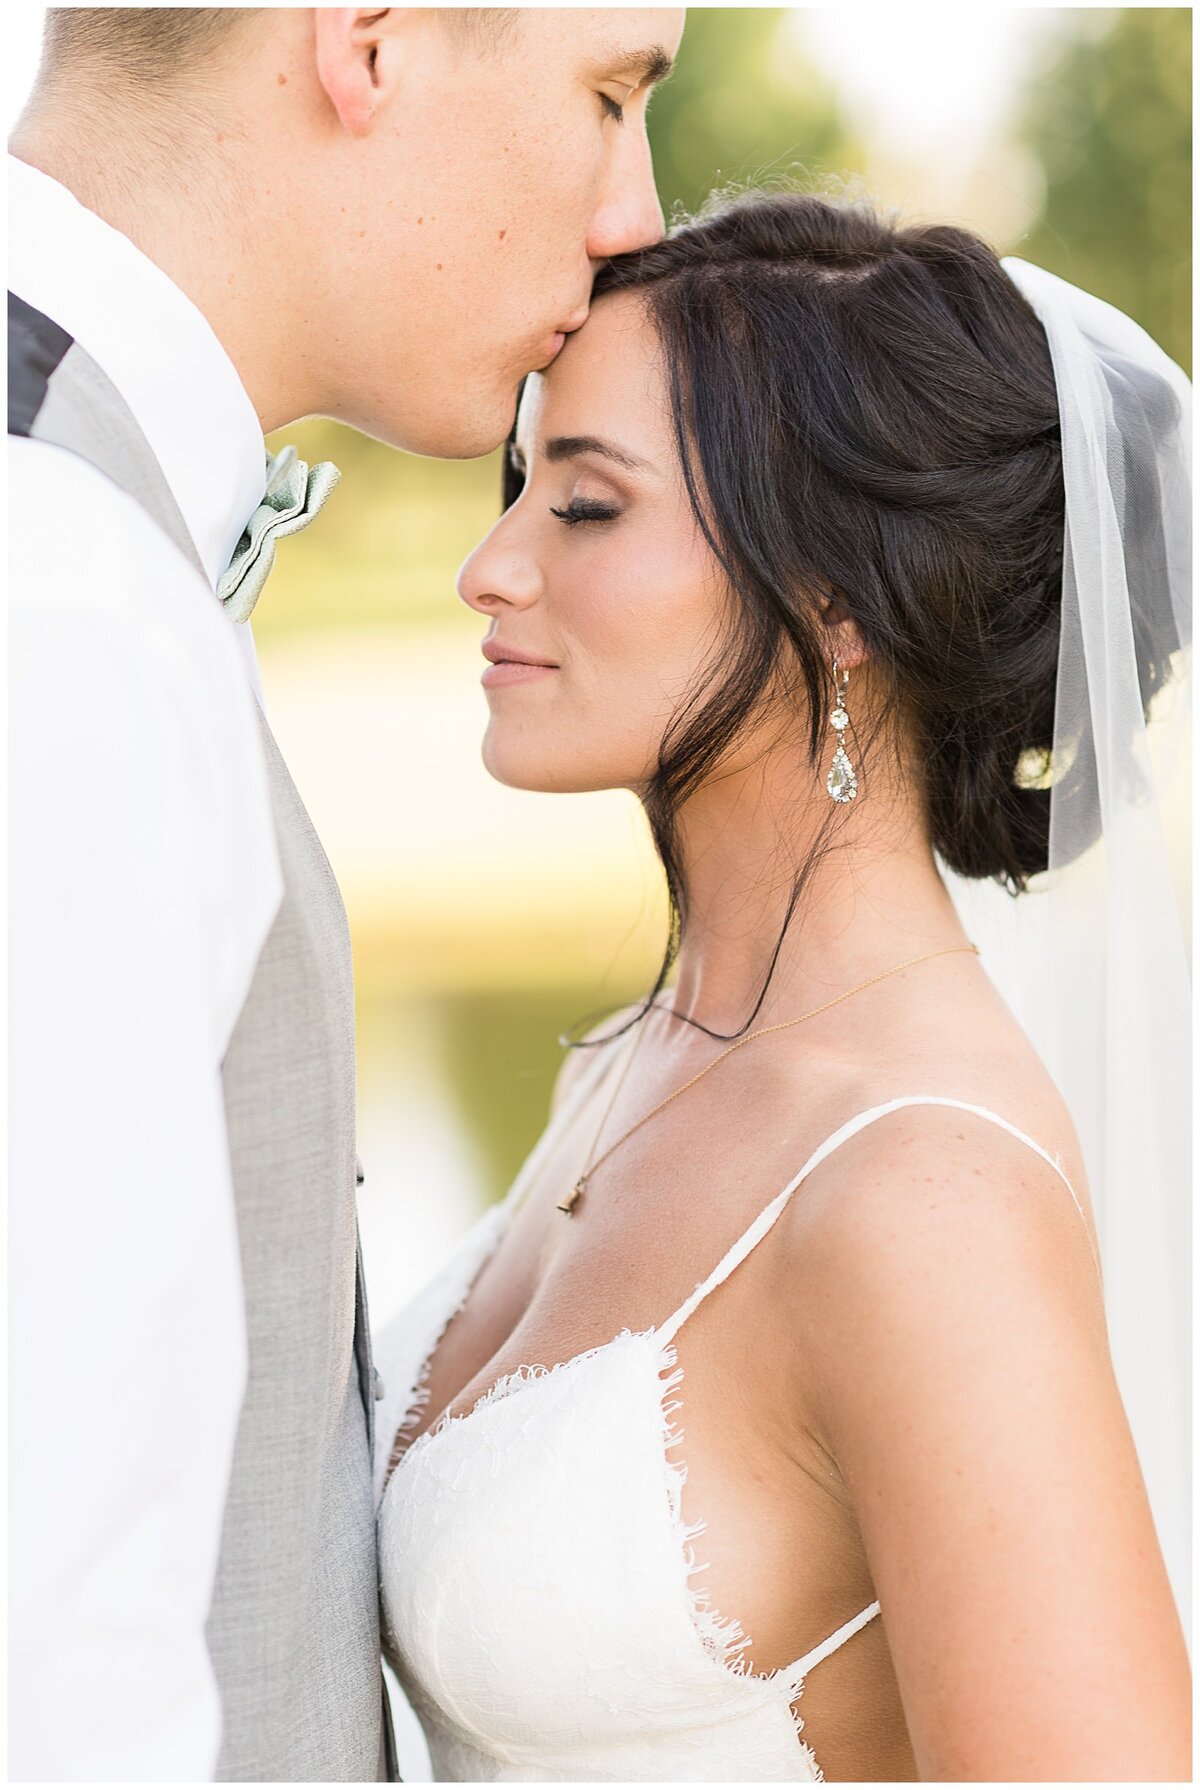 How to Select a Wedding Photographer that is right for you